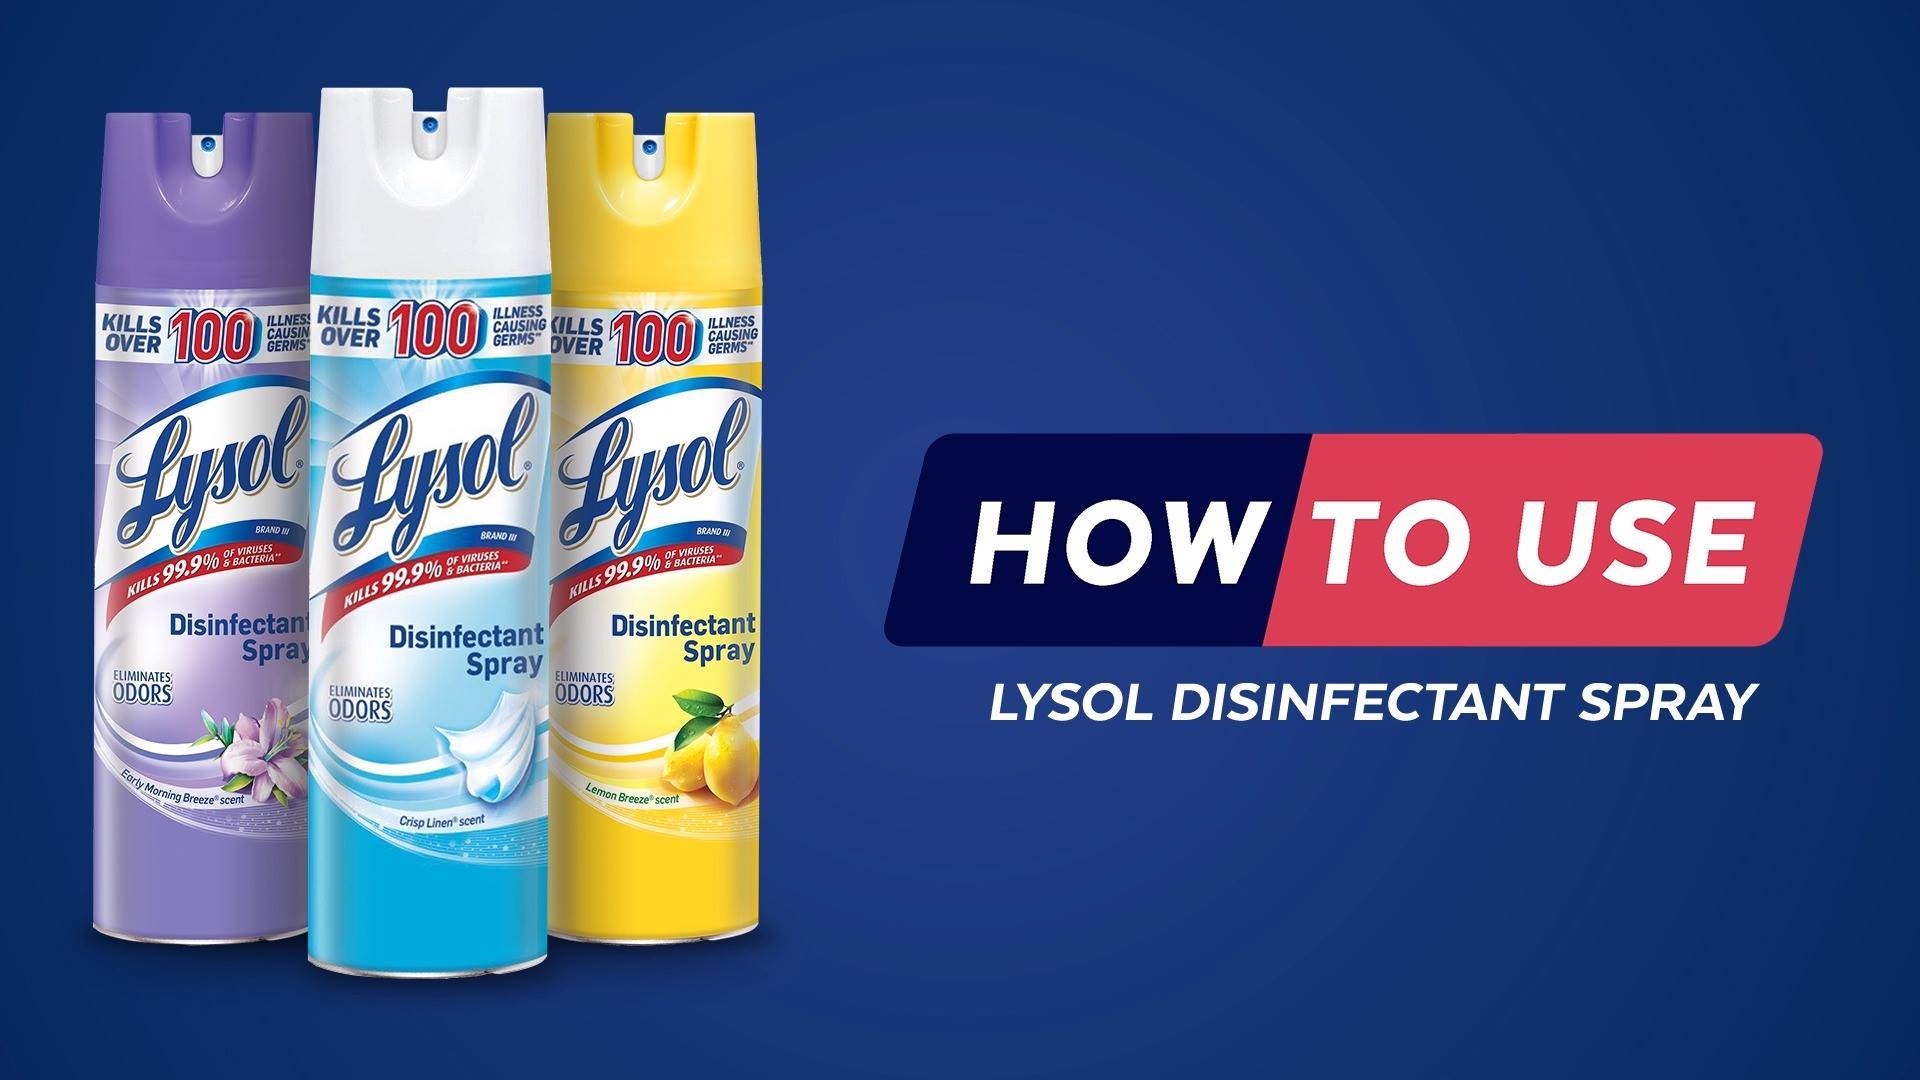 How to use Lysol Disinfectant Spray